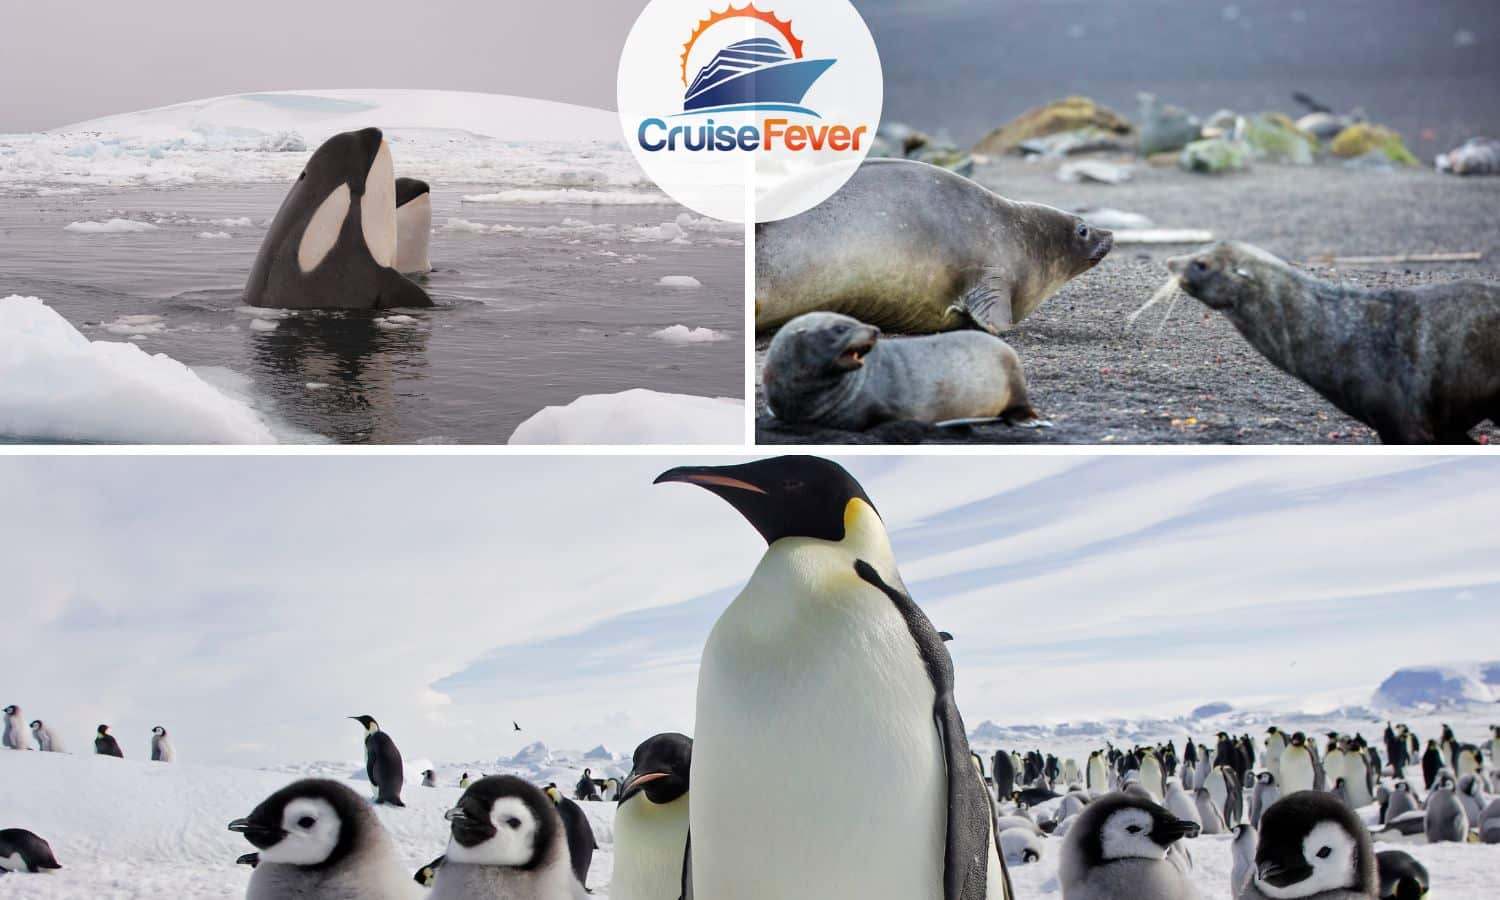 Orca whales, penguins and elephant seals in Antarctica